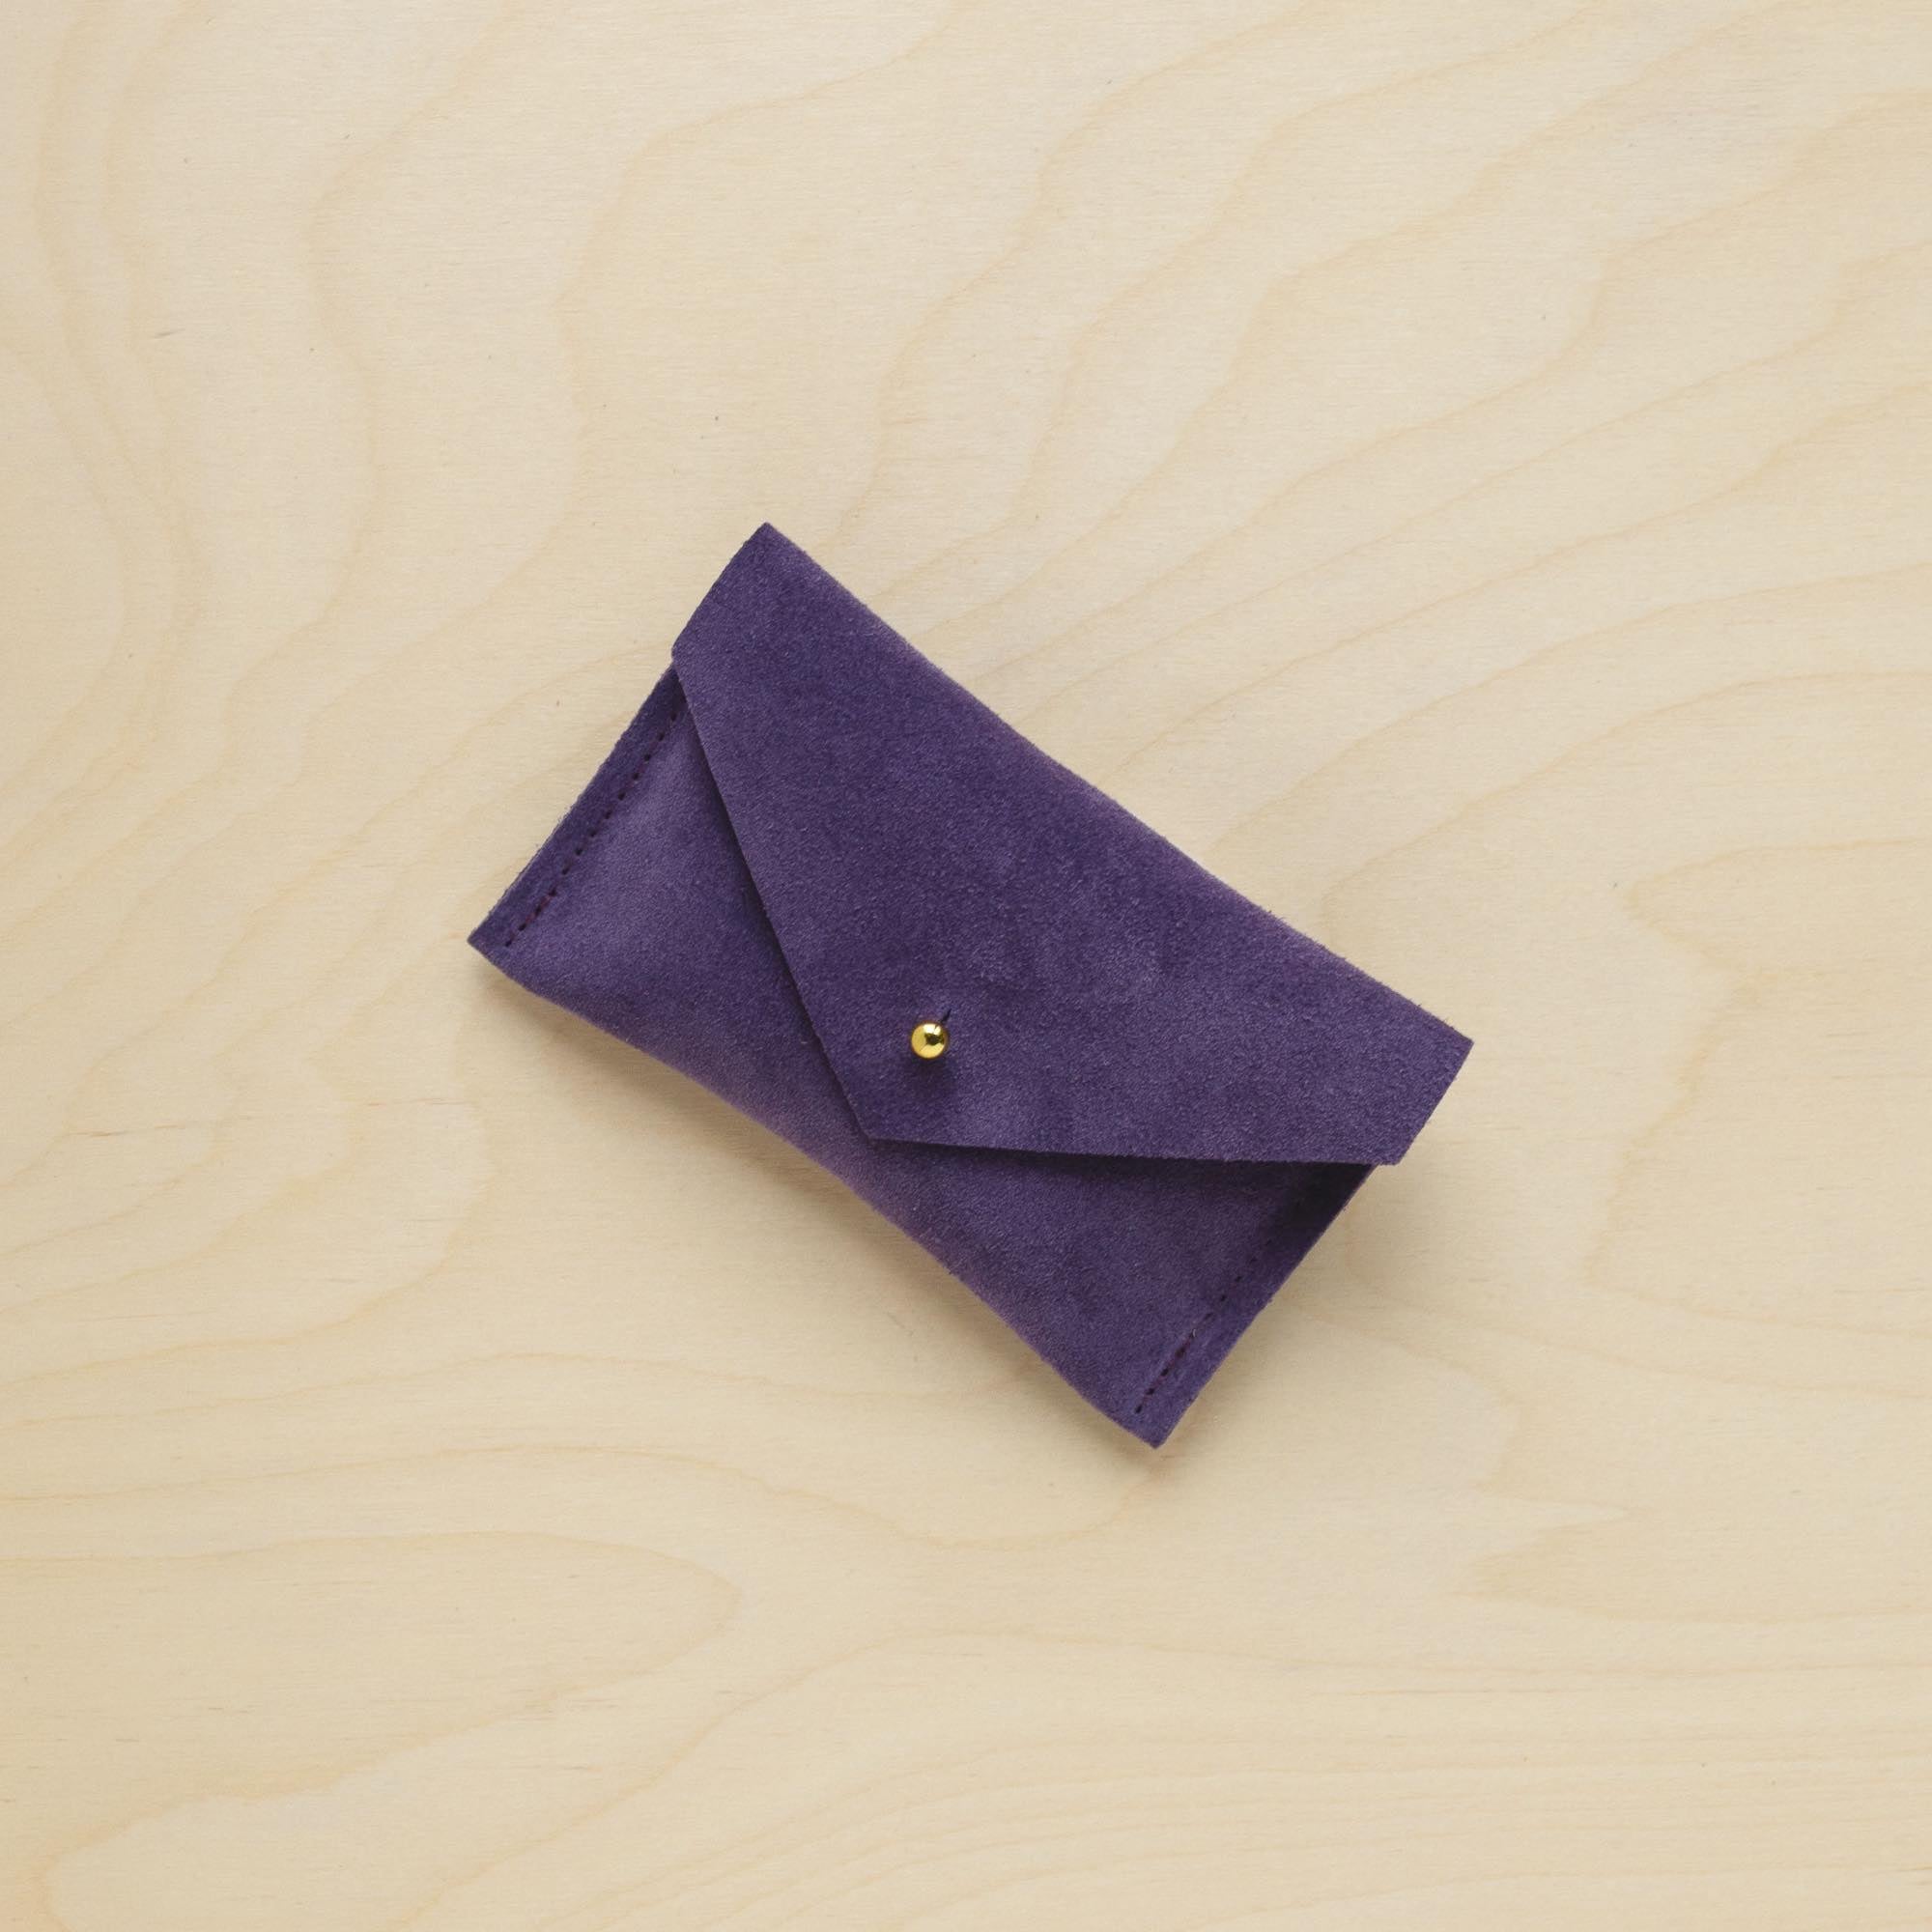 A suede Small Notions Pouch in Grape Purple. Complete with a stud for secure closing.